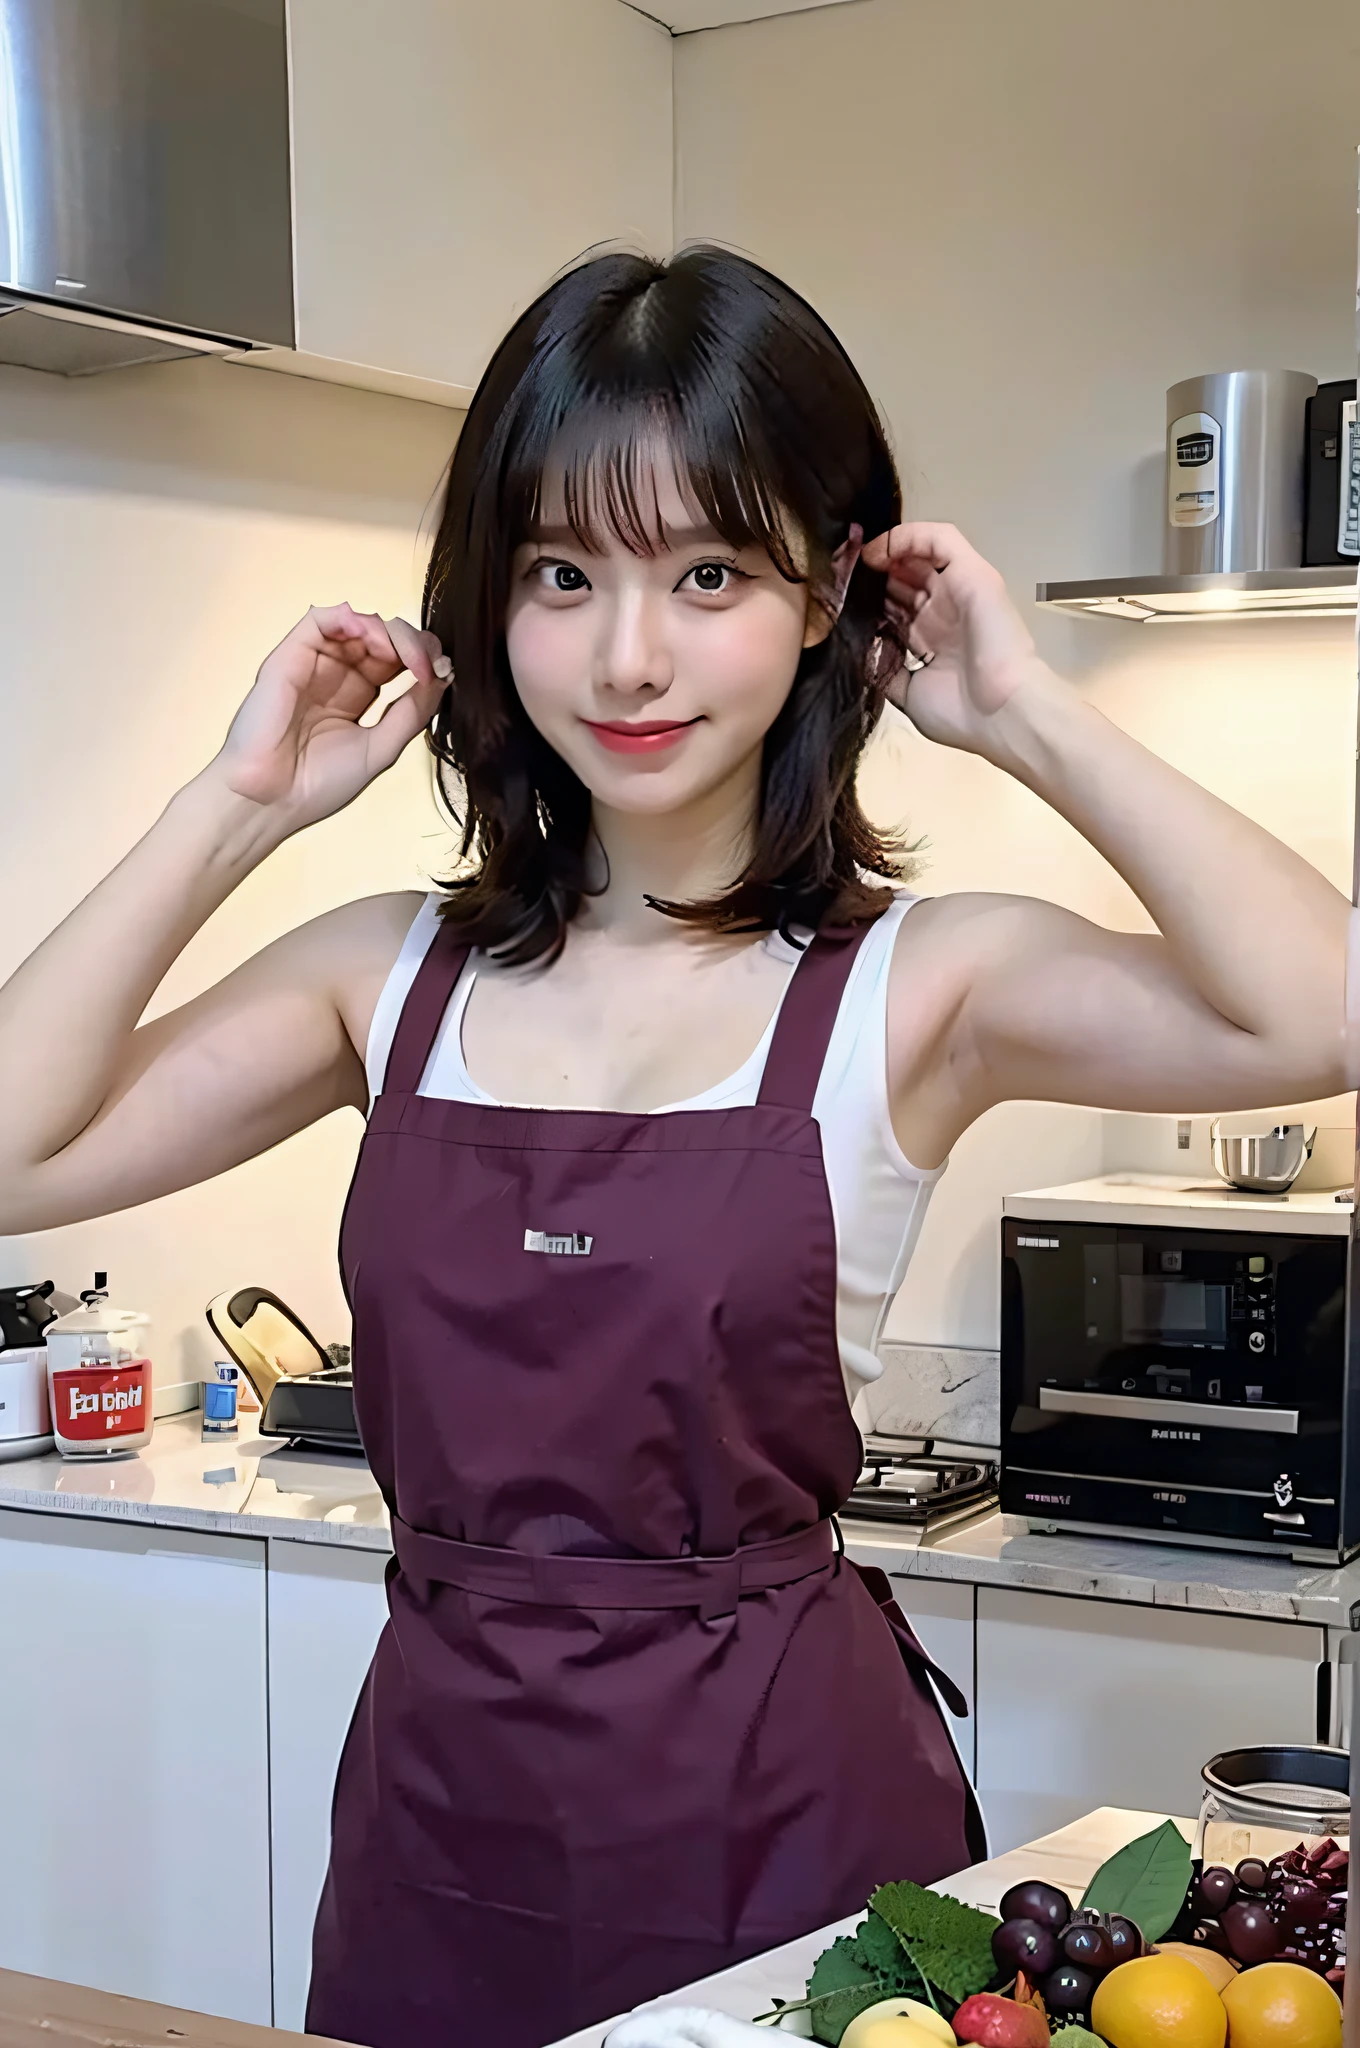 A woman cooking、(kitchin_aprons:1.Wear 3)、nice hand、4K、A high resolution、tmasterpiece、top-quality、wear cap:1.3、((hasselblad photograph))、Fine skin、sharp focus、(lighting like a movie)、Soft lighting、dynamic ungle、[:(Detailed face:1.2):0.2]、Medium chest、Sweat runs down the skin:1.2、(((In the kitchen))) Cute smile　Viewer's perspective　Colossal tits　tying  hair　Sleeveless　Extend your upper arm　Shoulders sticking out　cleanness　big kitchen　Beautiful kitchen　Wine glasses　posterior view　Behind　backs